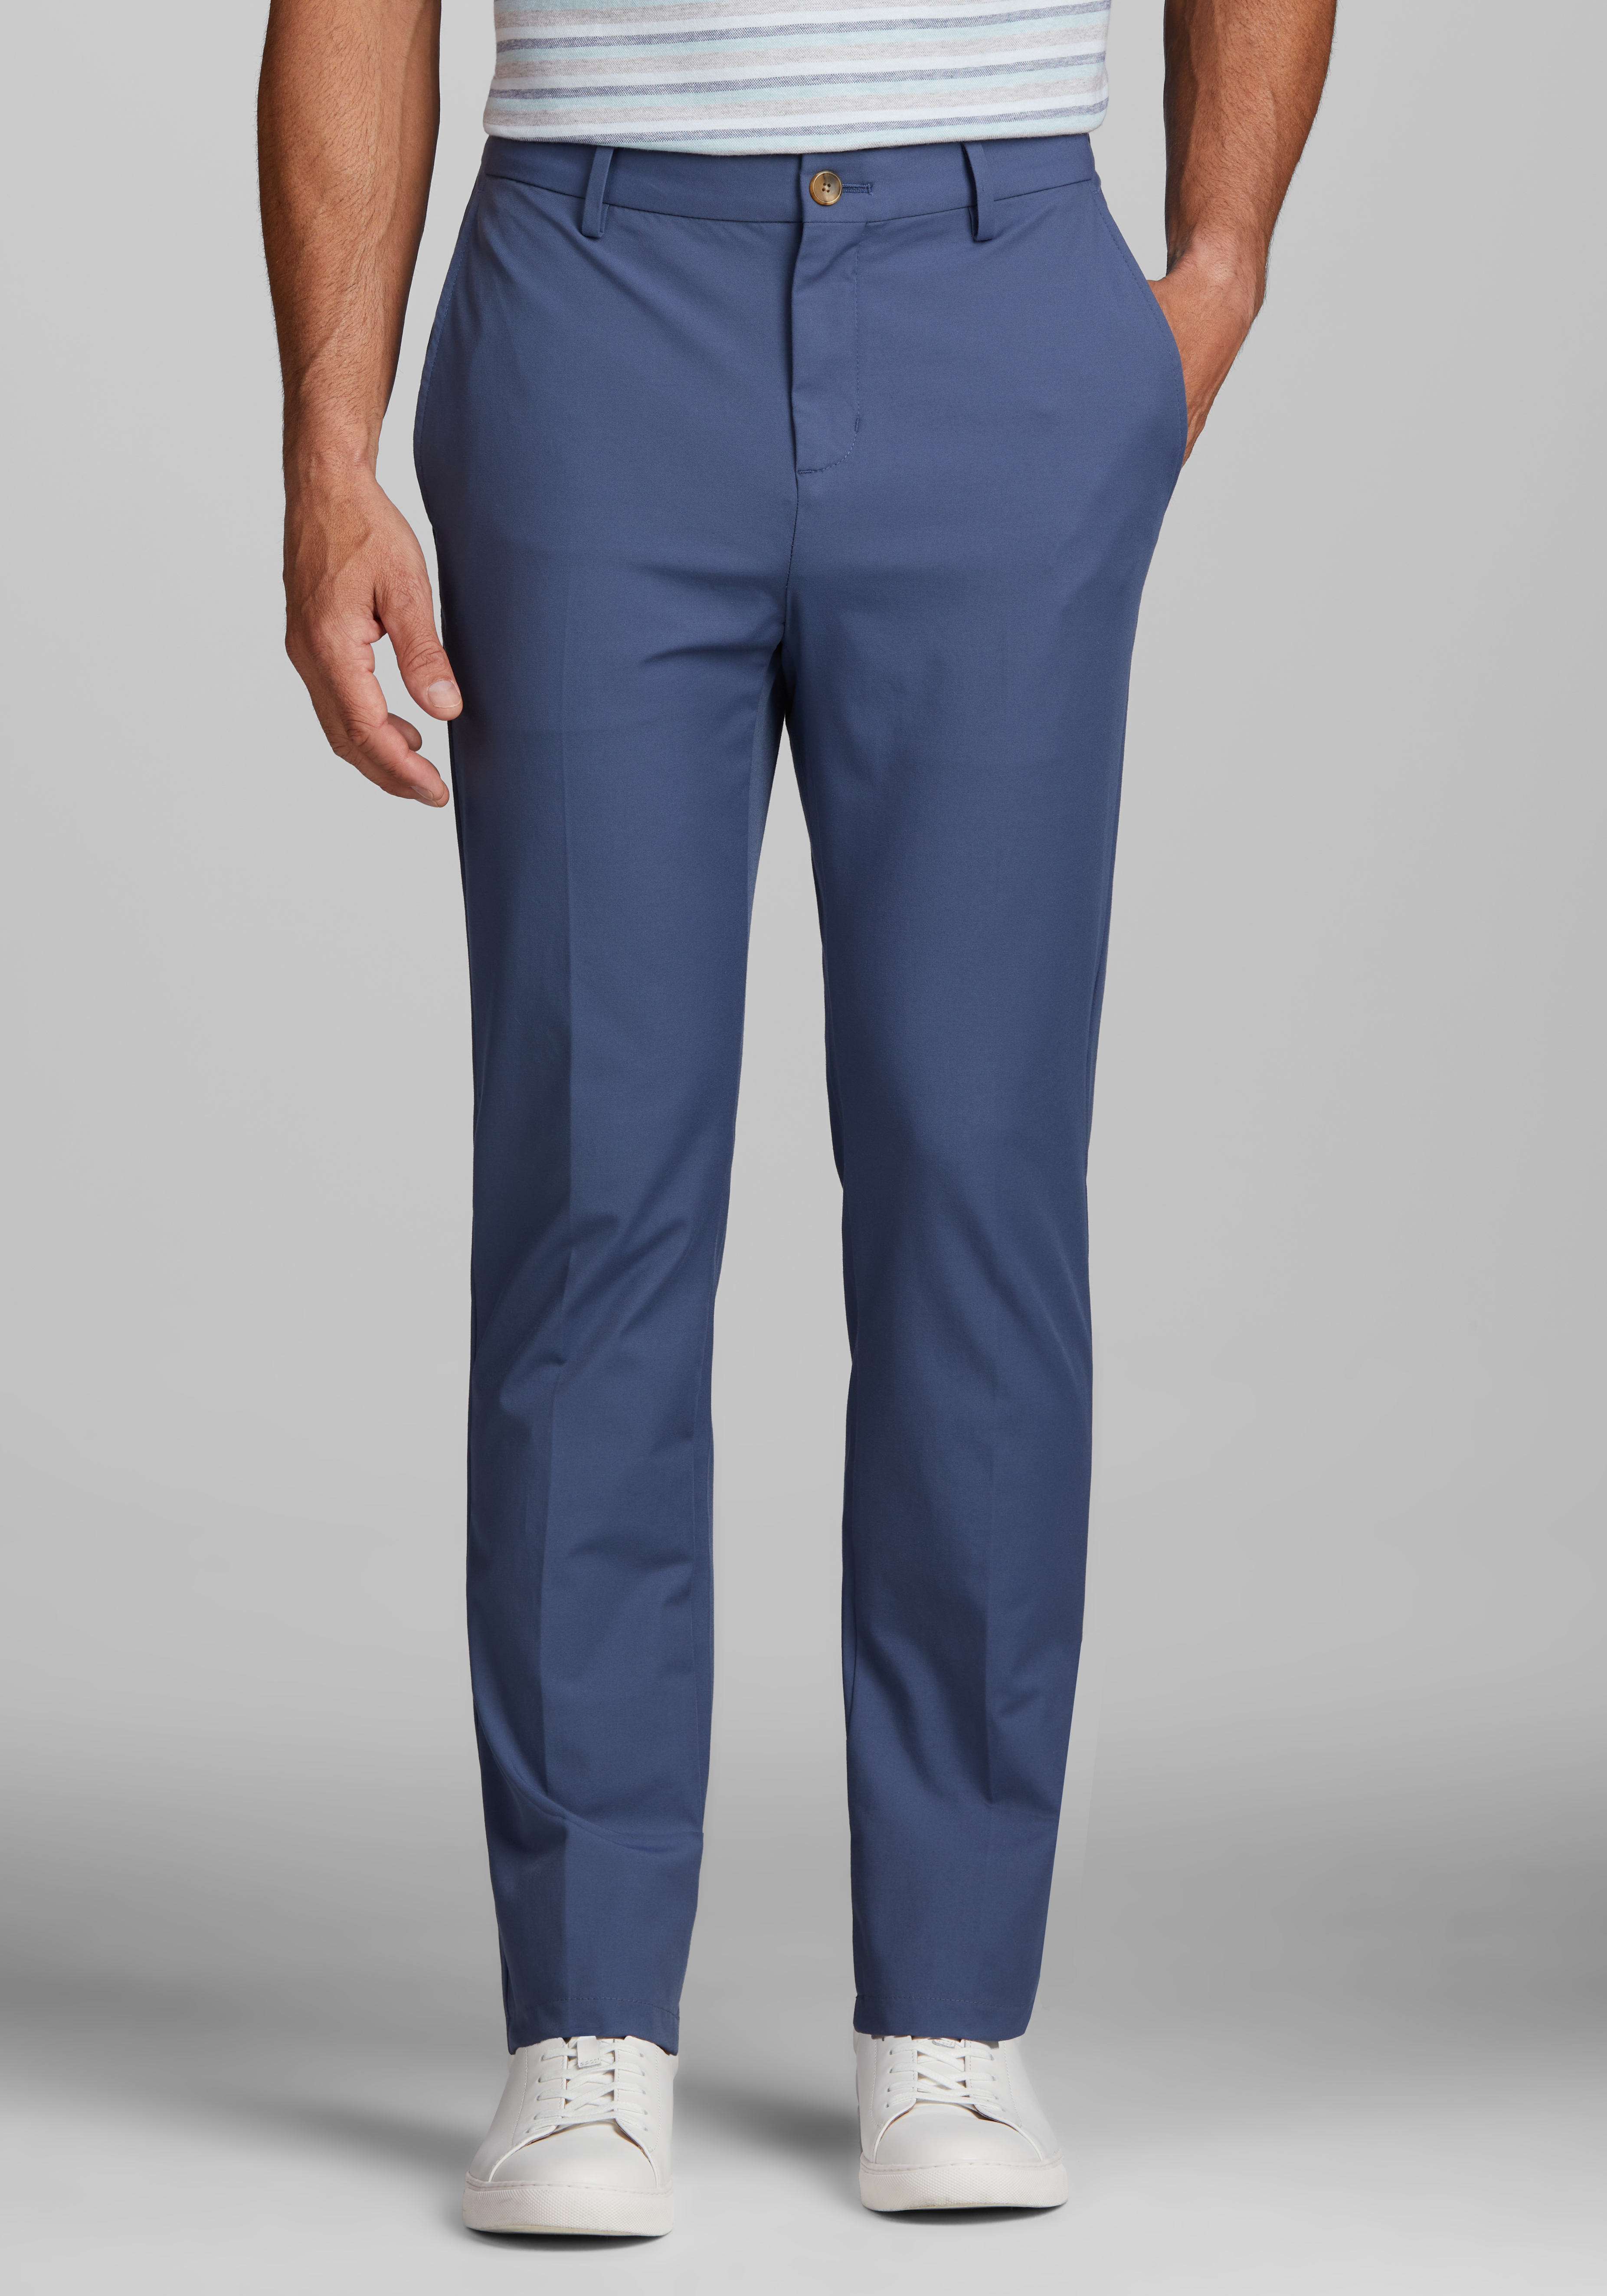 Traveler Performance Slim Fit Chinos - Memorial Day Outfits and 